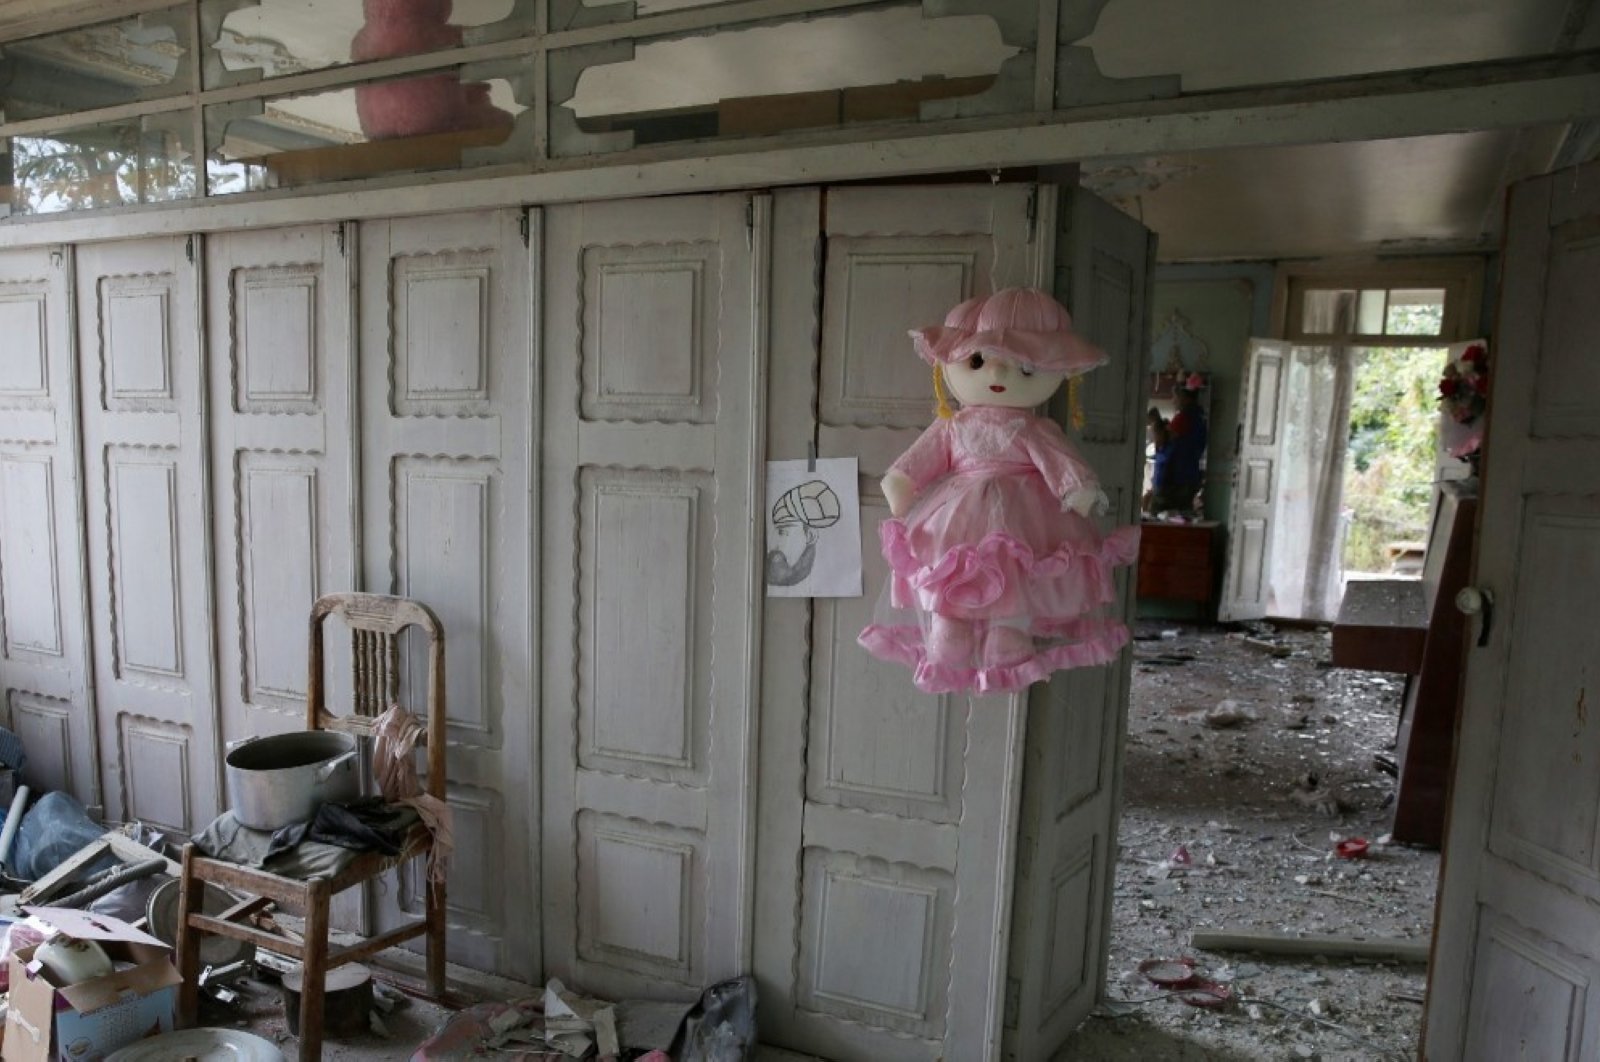 An Azerbaijani household that was damaged by recent shelling by Armenian forces in Tartar, Azerbaijan, Sept. 30, 2020. (DHA Photo)